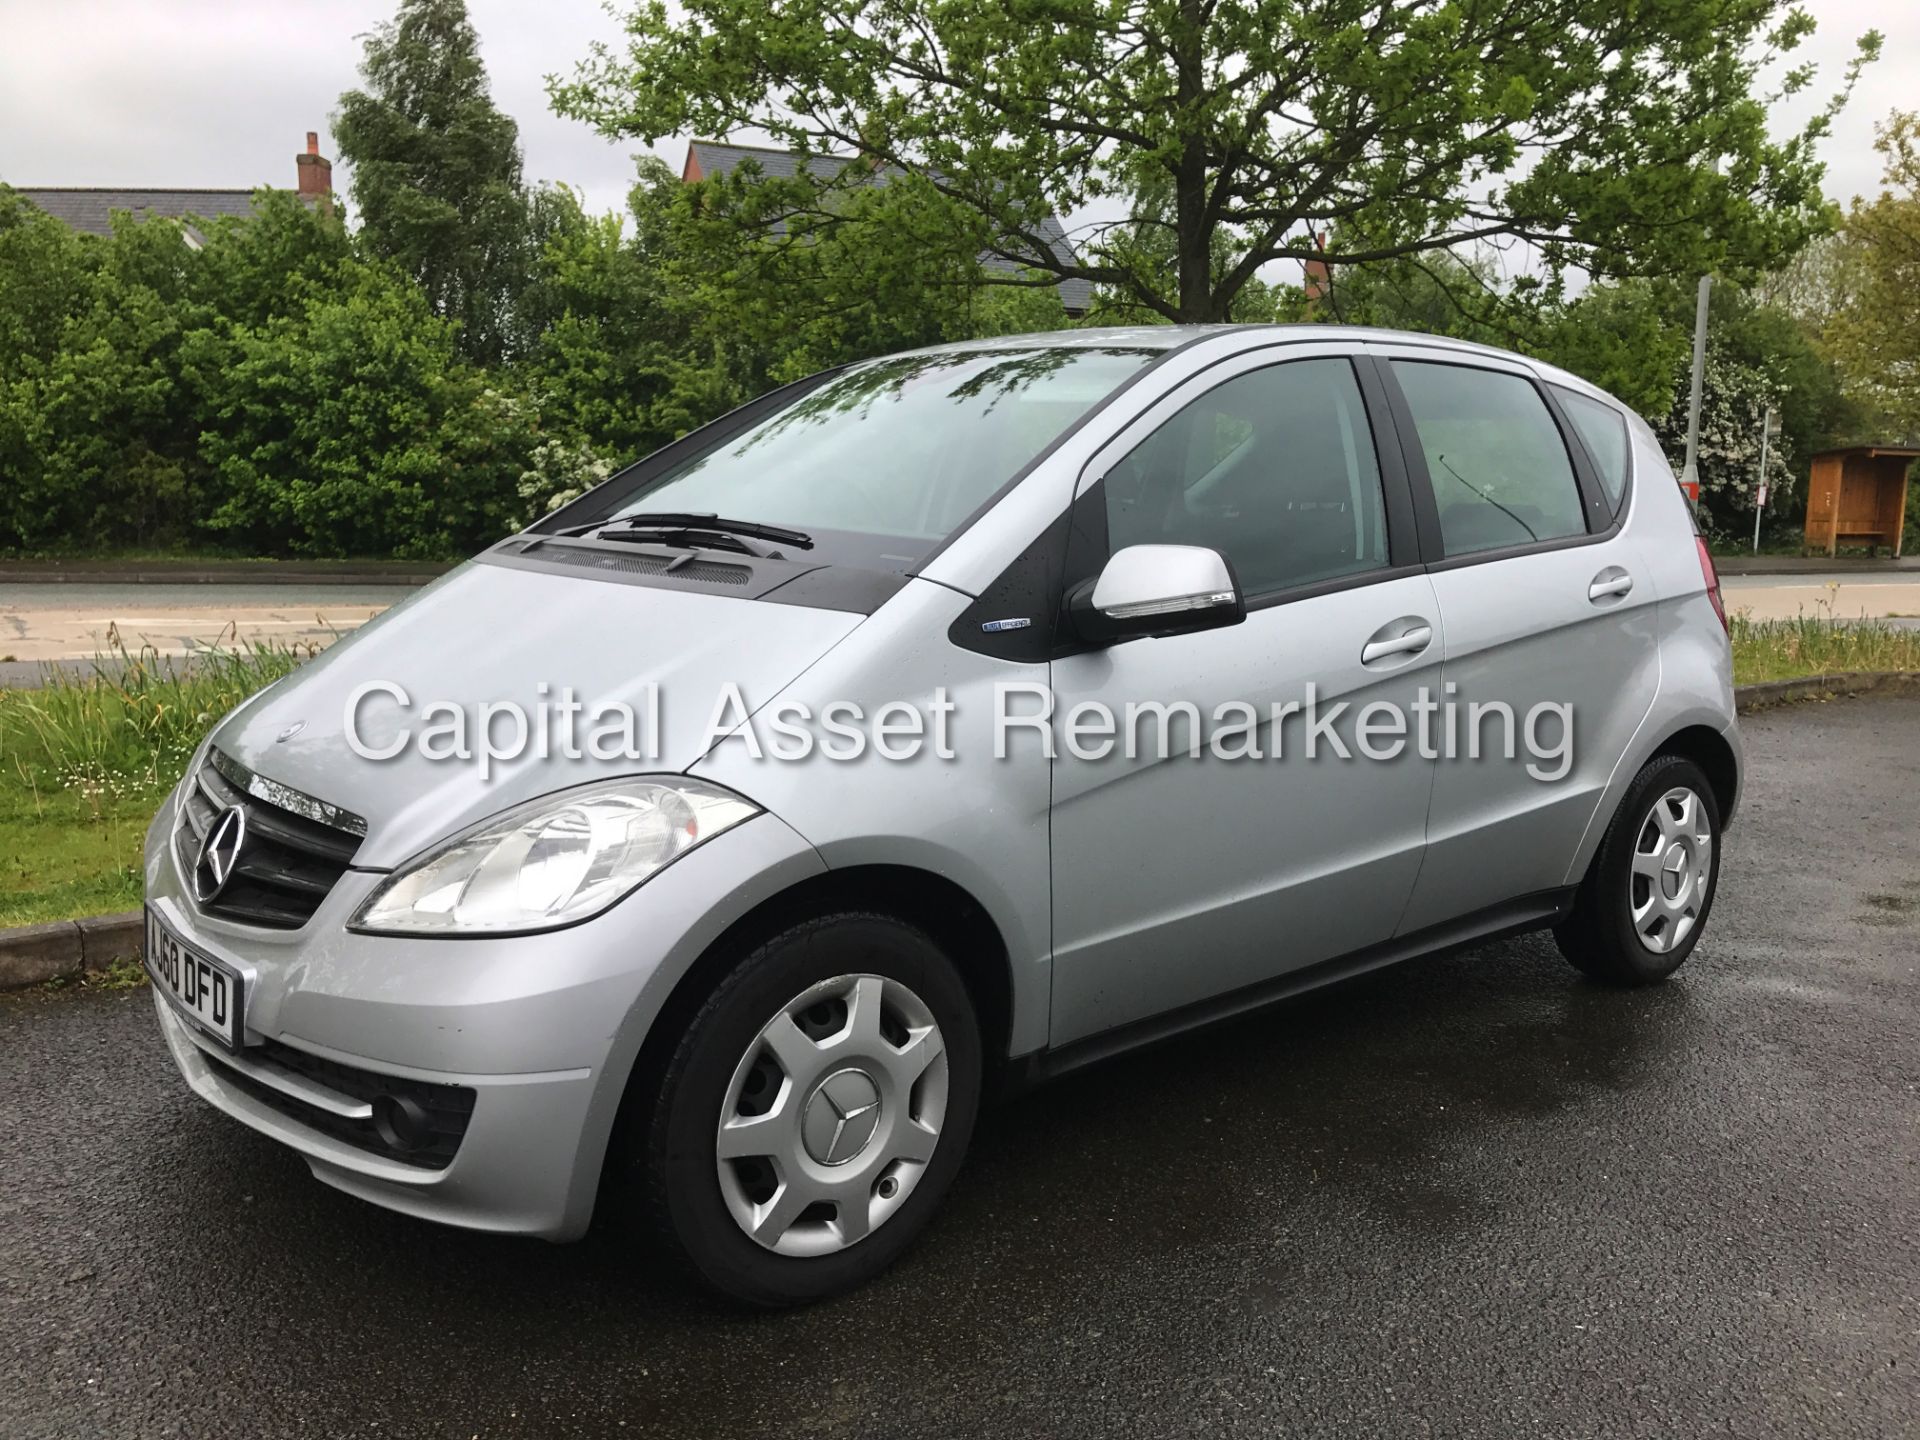 MERCEDES-BENZ A160 BLUEEFFICIENCY 'SE EDITION' (2011 MODEL) **LOW MILES** (55 MPG +) - Image 5 of 27